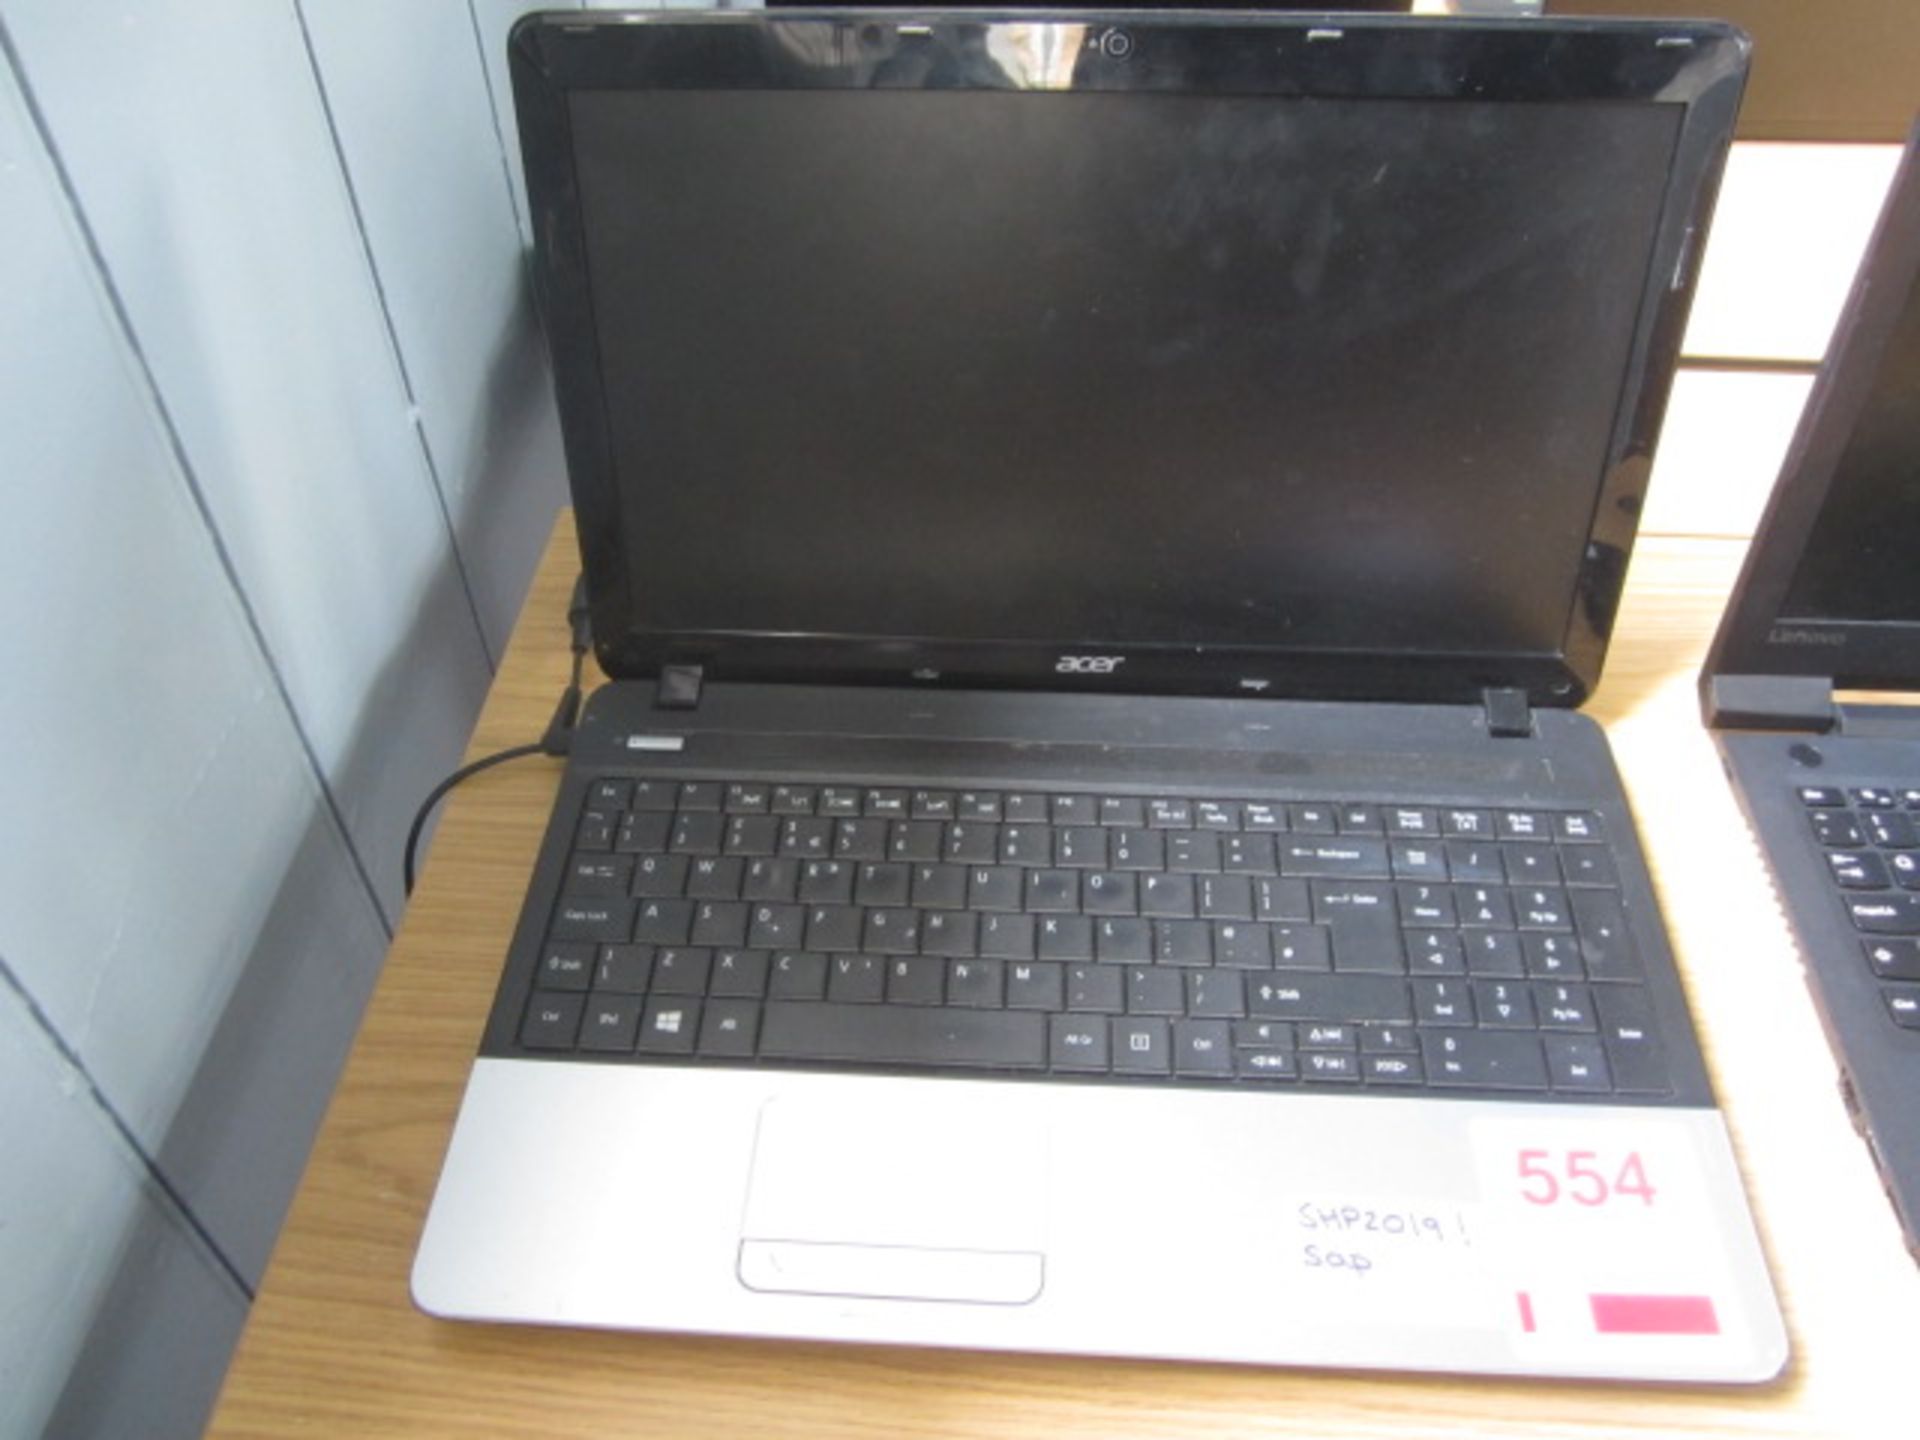 Acer laptop. Located at 6th form premisesPlease note: This lot, for VAT purposes, is sold under